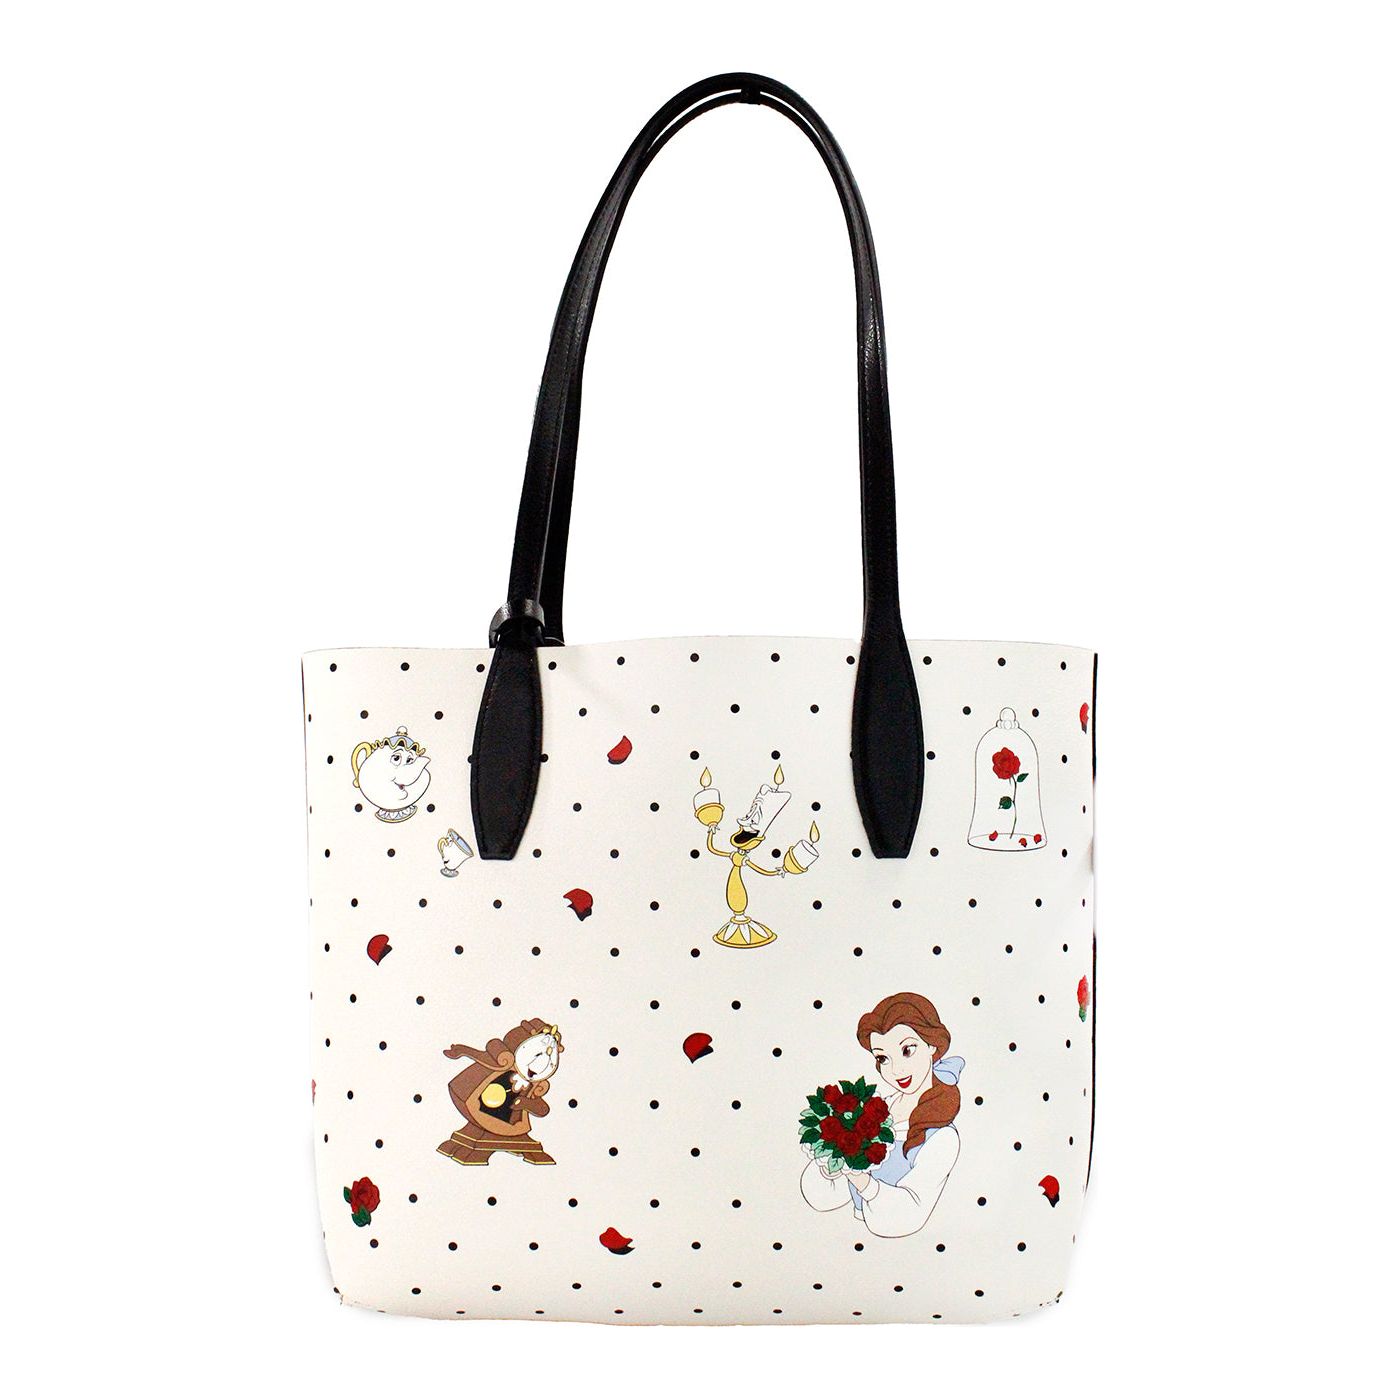 Kate Spade Disney Beauty And The Beast Small Leather Reversible Tote Handbag disney-beauty-and-the-beast-small-leather-reversible-tote-handbag